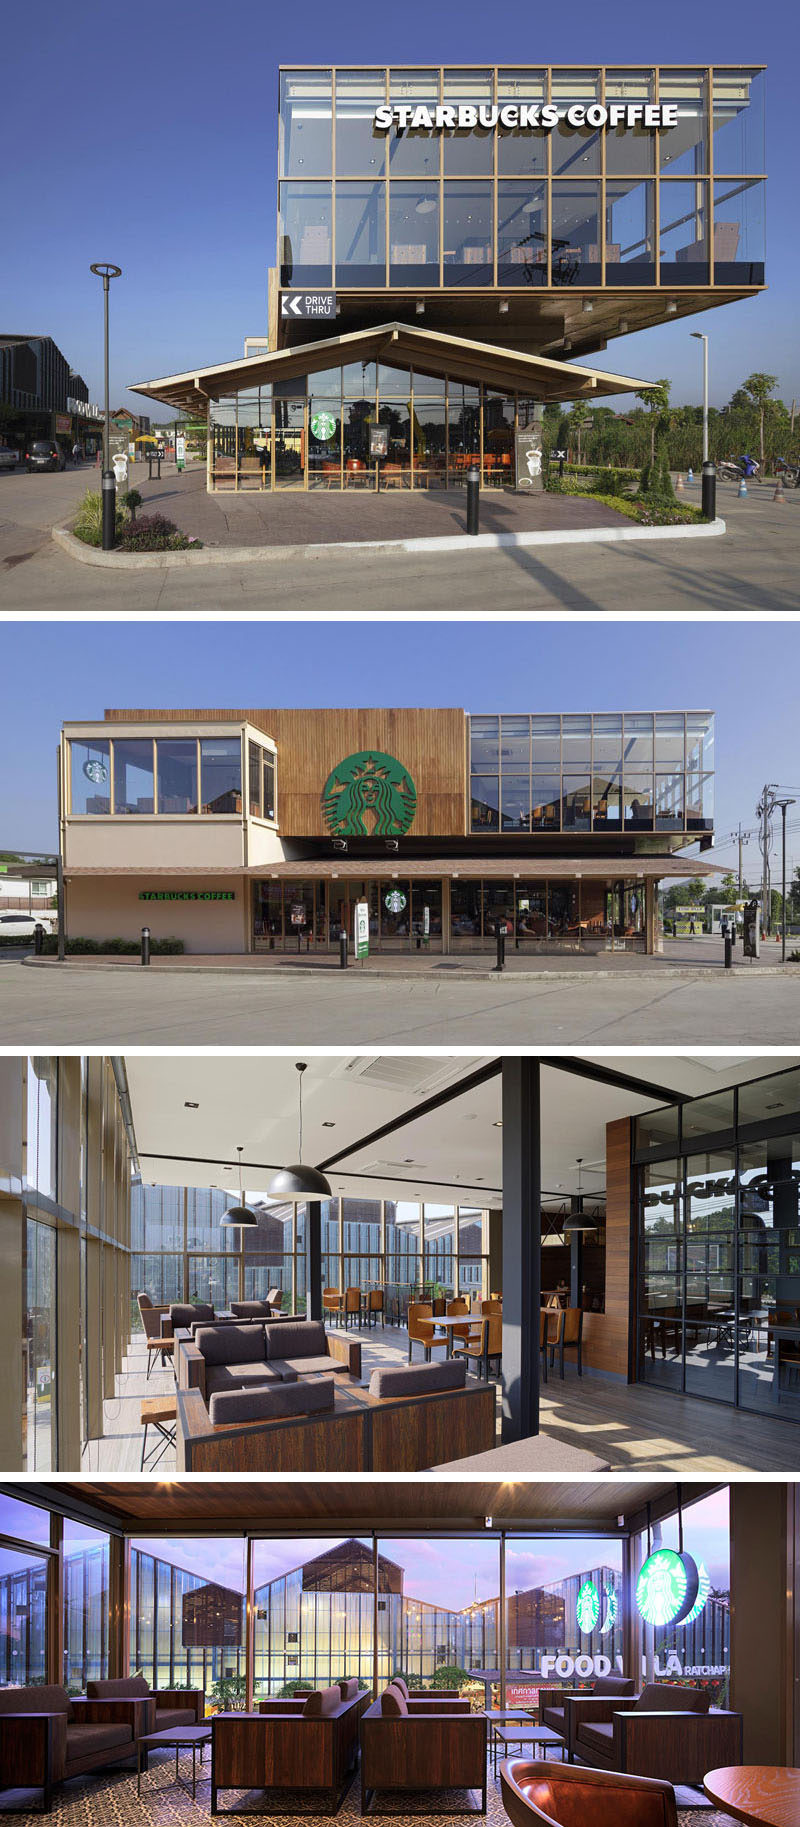 11 Starbucks Coffee Shops From Around The World // This multi-level Starbucks in Bangkok, Thailand took a page out of Thai design books when they designed the steel building with a gable roof on the lower part of the building to be reminiscent of traditional Thai farm houses.